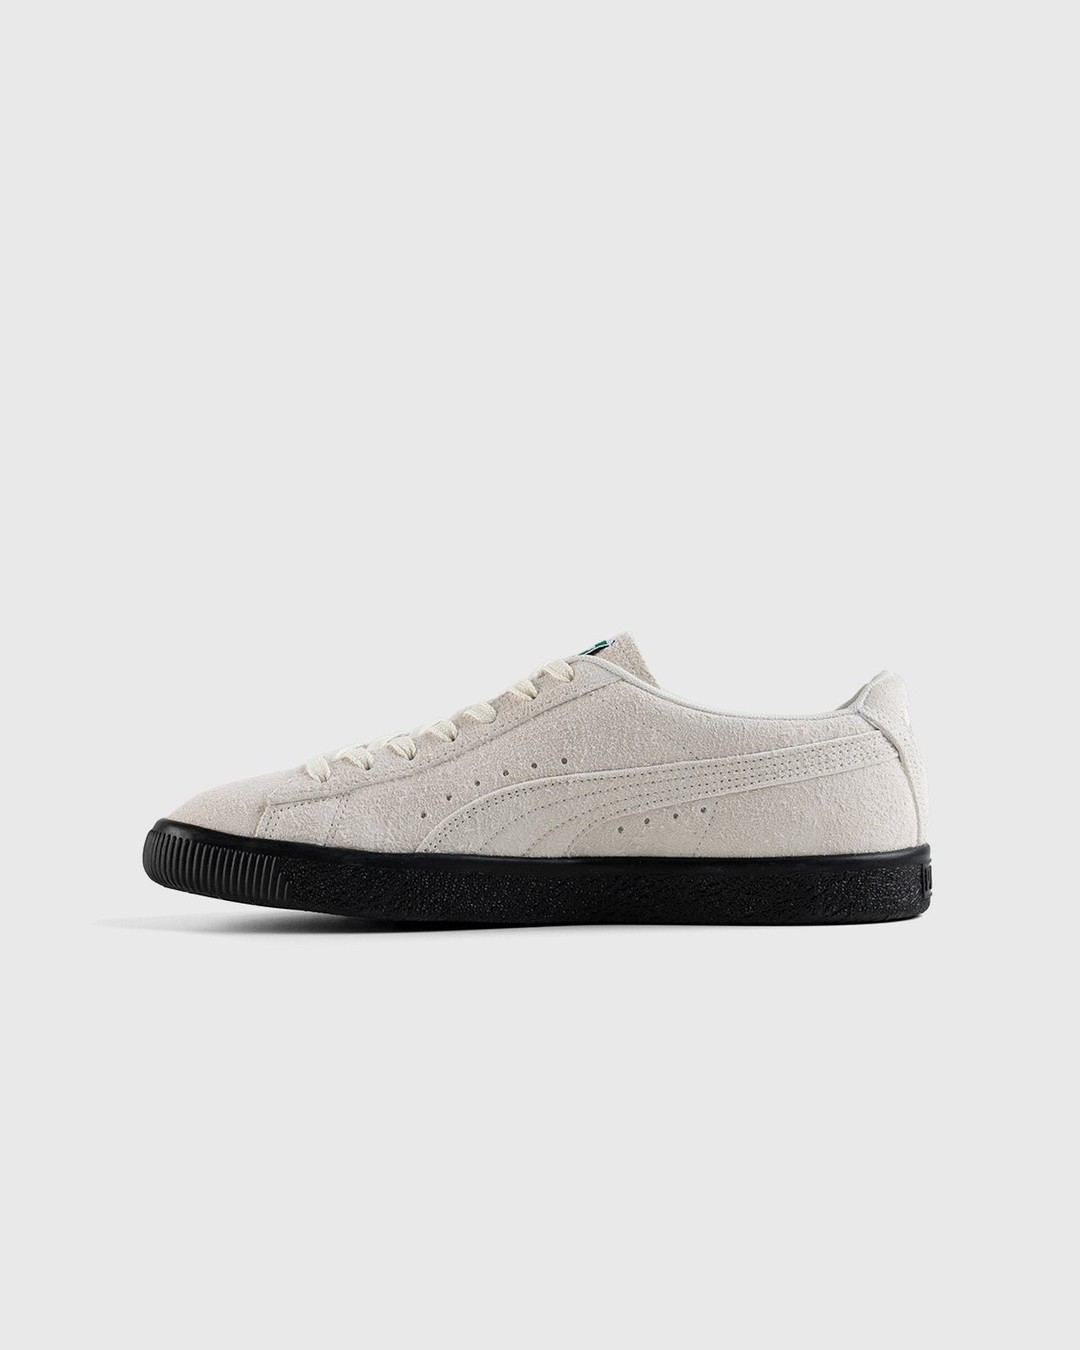 Puma x Butter Goods – Suede VTG Whisper White/Puma Black - Low Top Sneakers - Green - Image 2